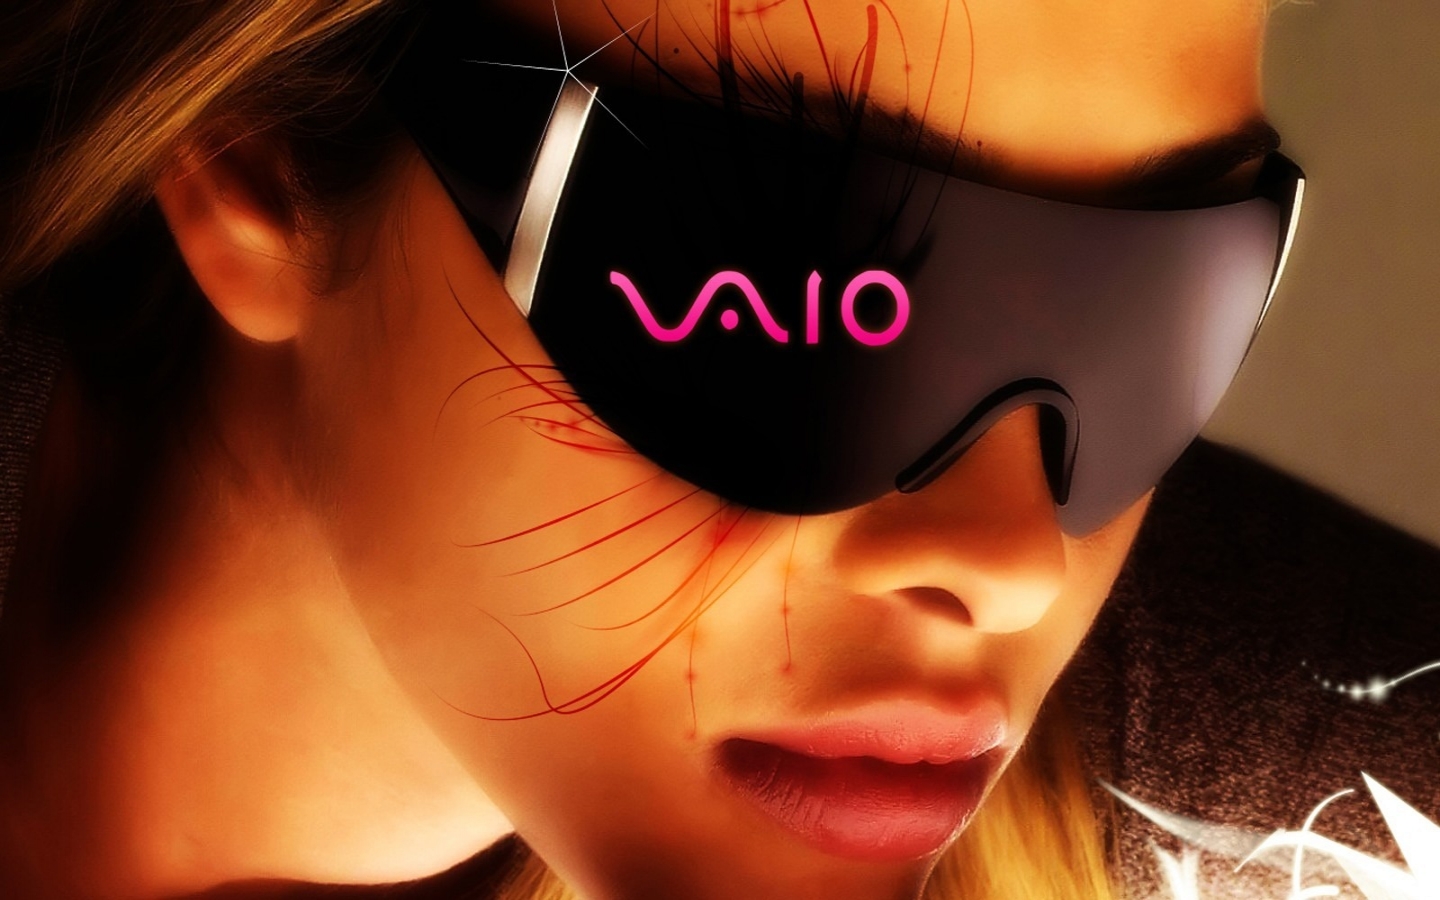 Beautiful Sony Vaio for 1440 x 900 widescreen resolution